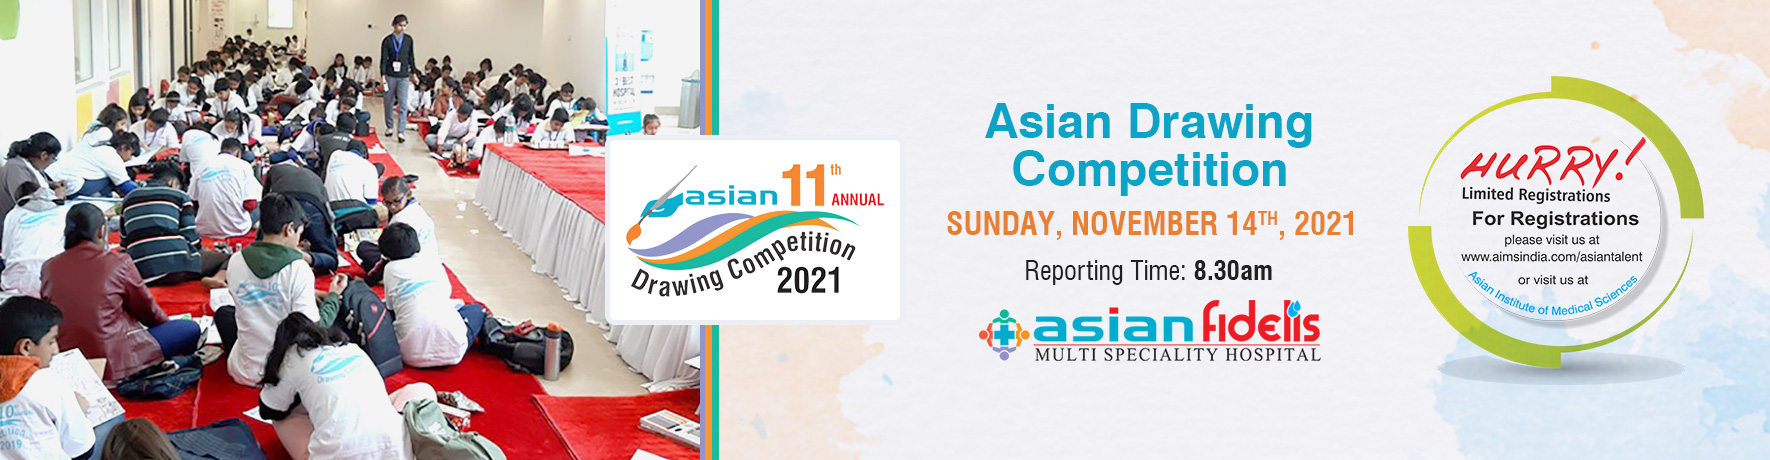 Asian Drawing Competition